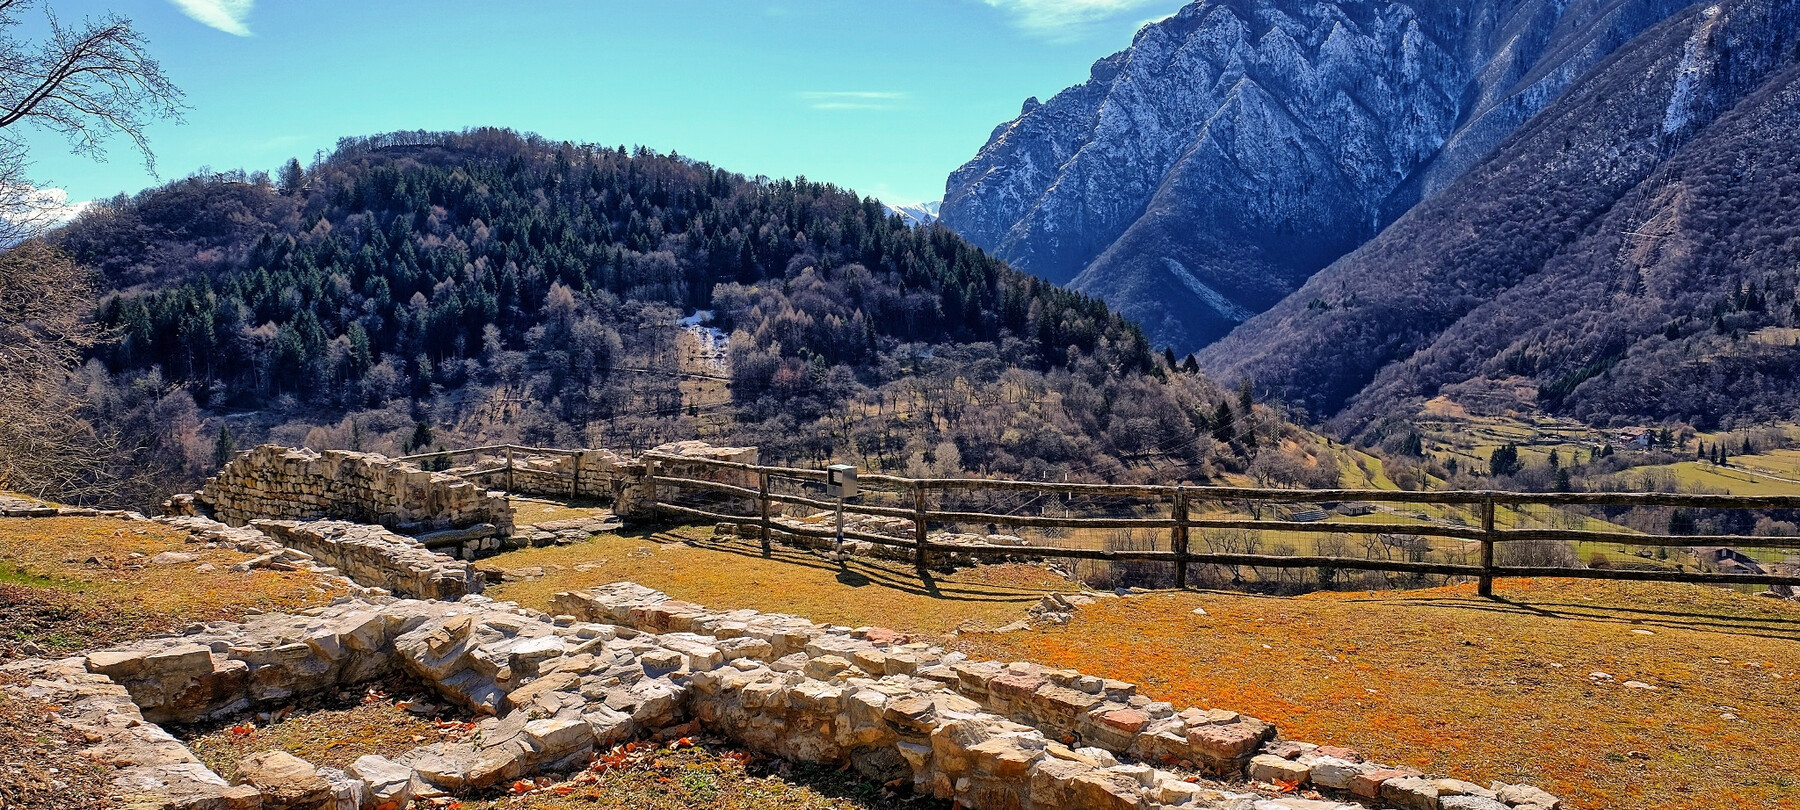 A stroll through history | Archaeological sites in stunning locations